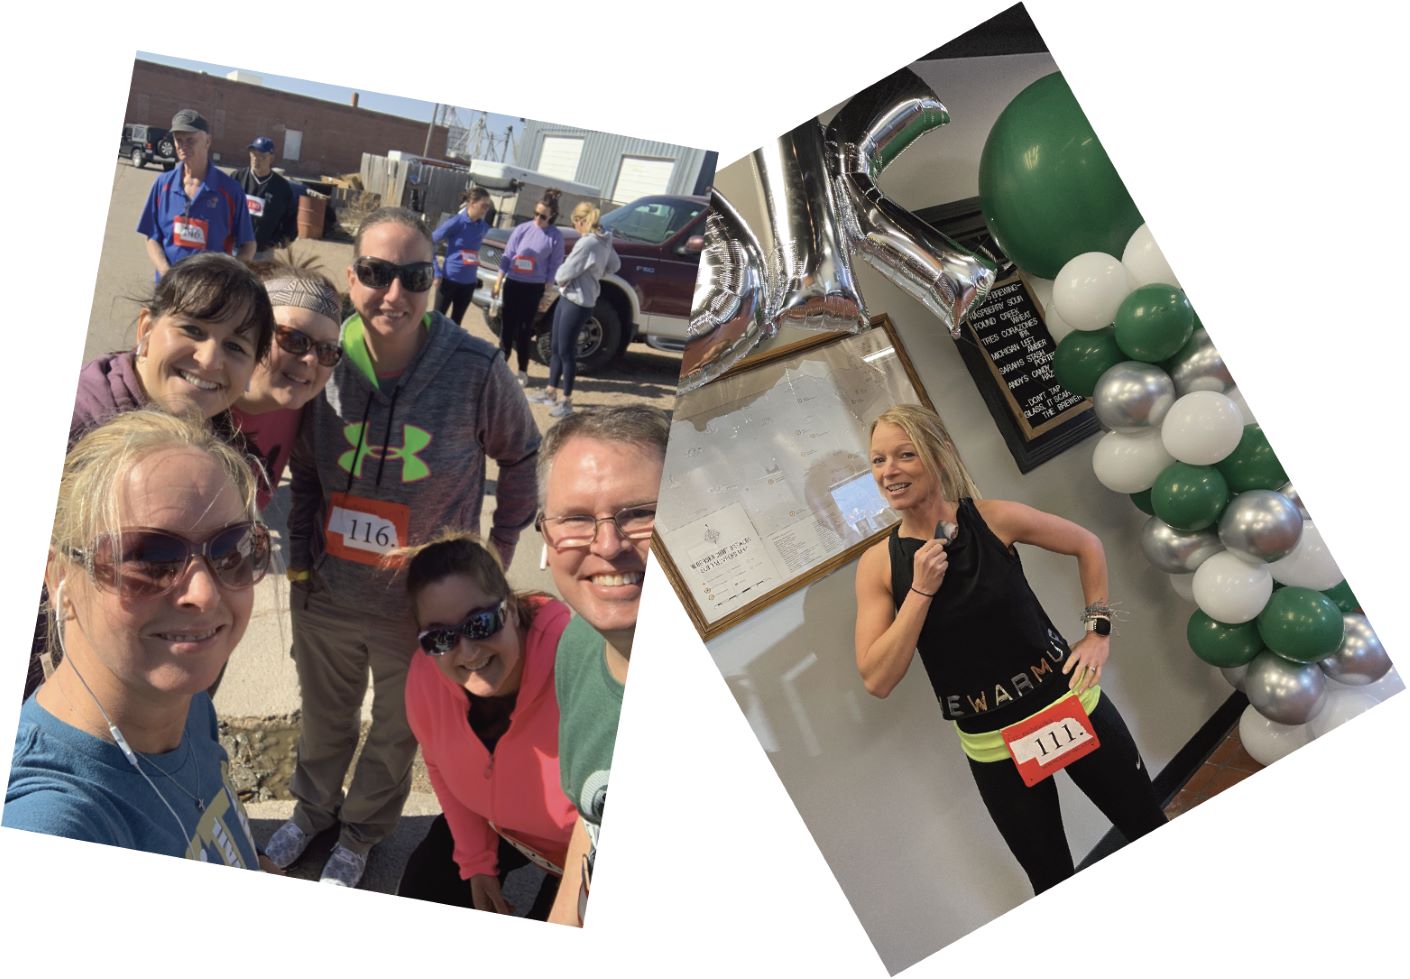 A photo collage of a group of runners preparing for a marathon. A female runner stands next to green, white, and silver balloons.